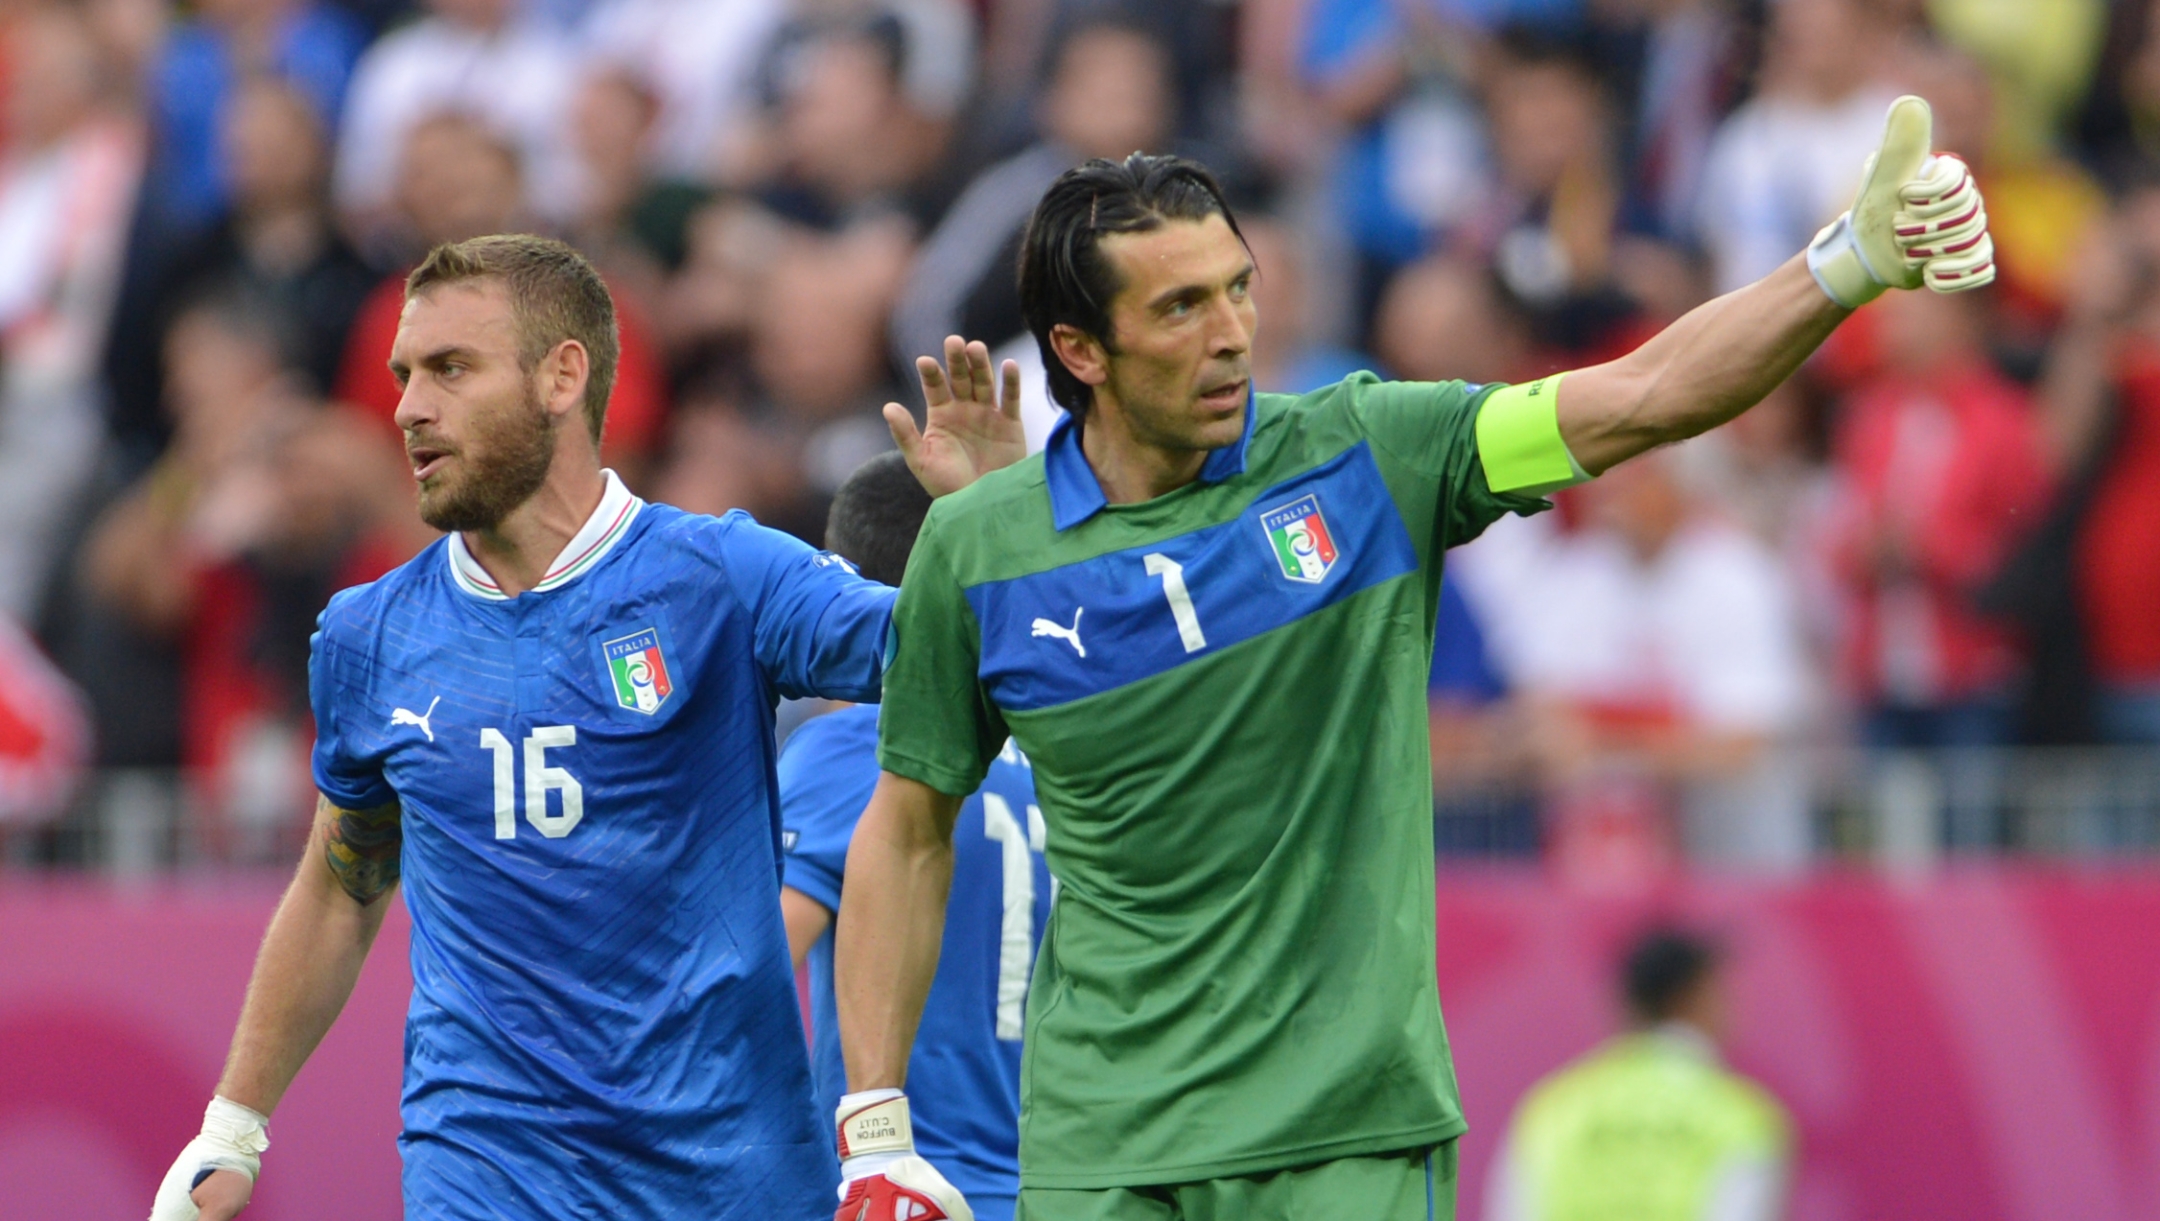 Italian midfielder Daniele De Rossi (L) and Italian goalkeeper Gianluigi Buffon react at the end of the Euro 2012 championships football match Spain vs Italy on June 10, 2012 at the Gdansk Arena.     AFP PHOTO/ GIUSEPPE CACACE        (Photo credit should read GIUSEPPE CACACE/AFP/GettyImages)